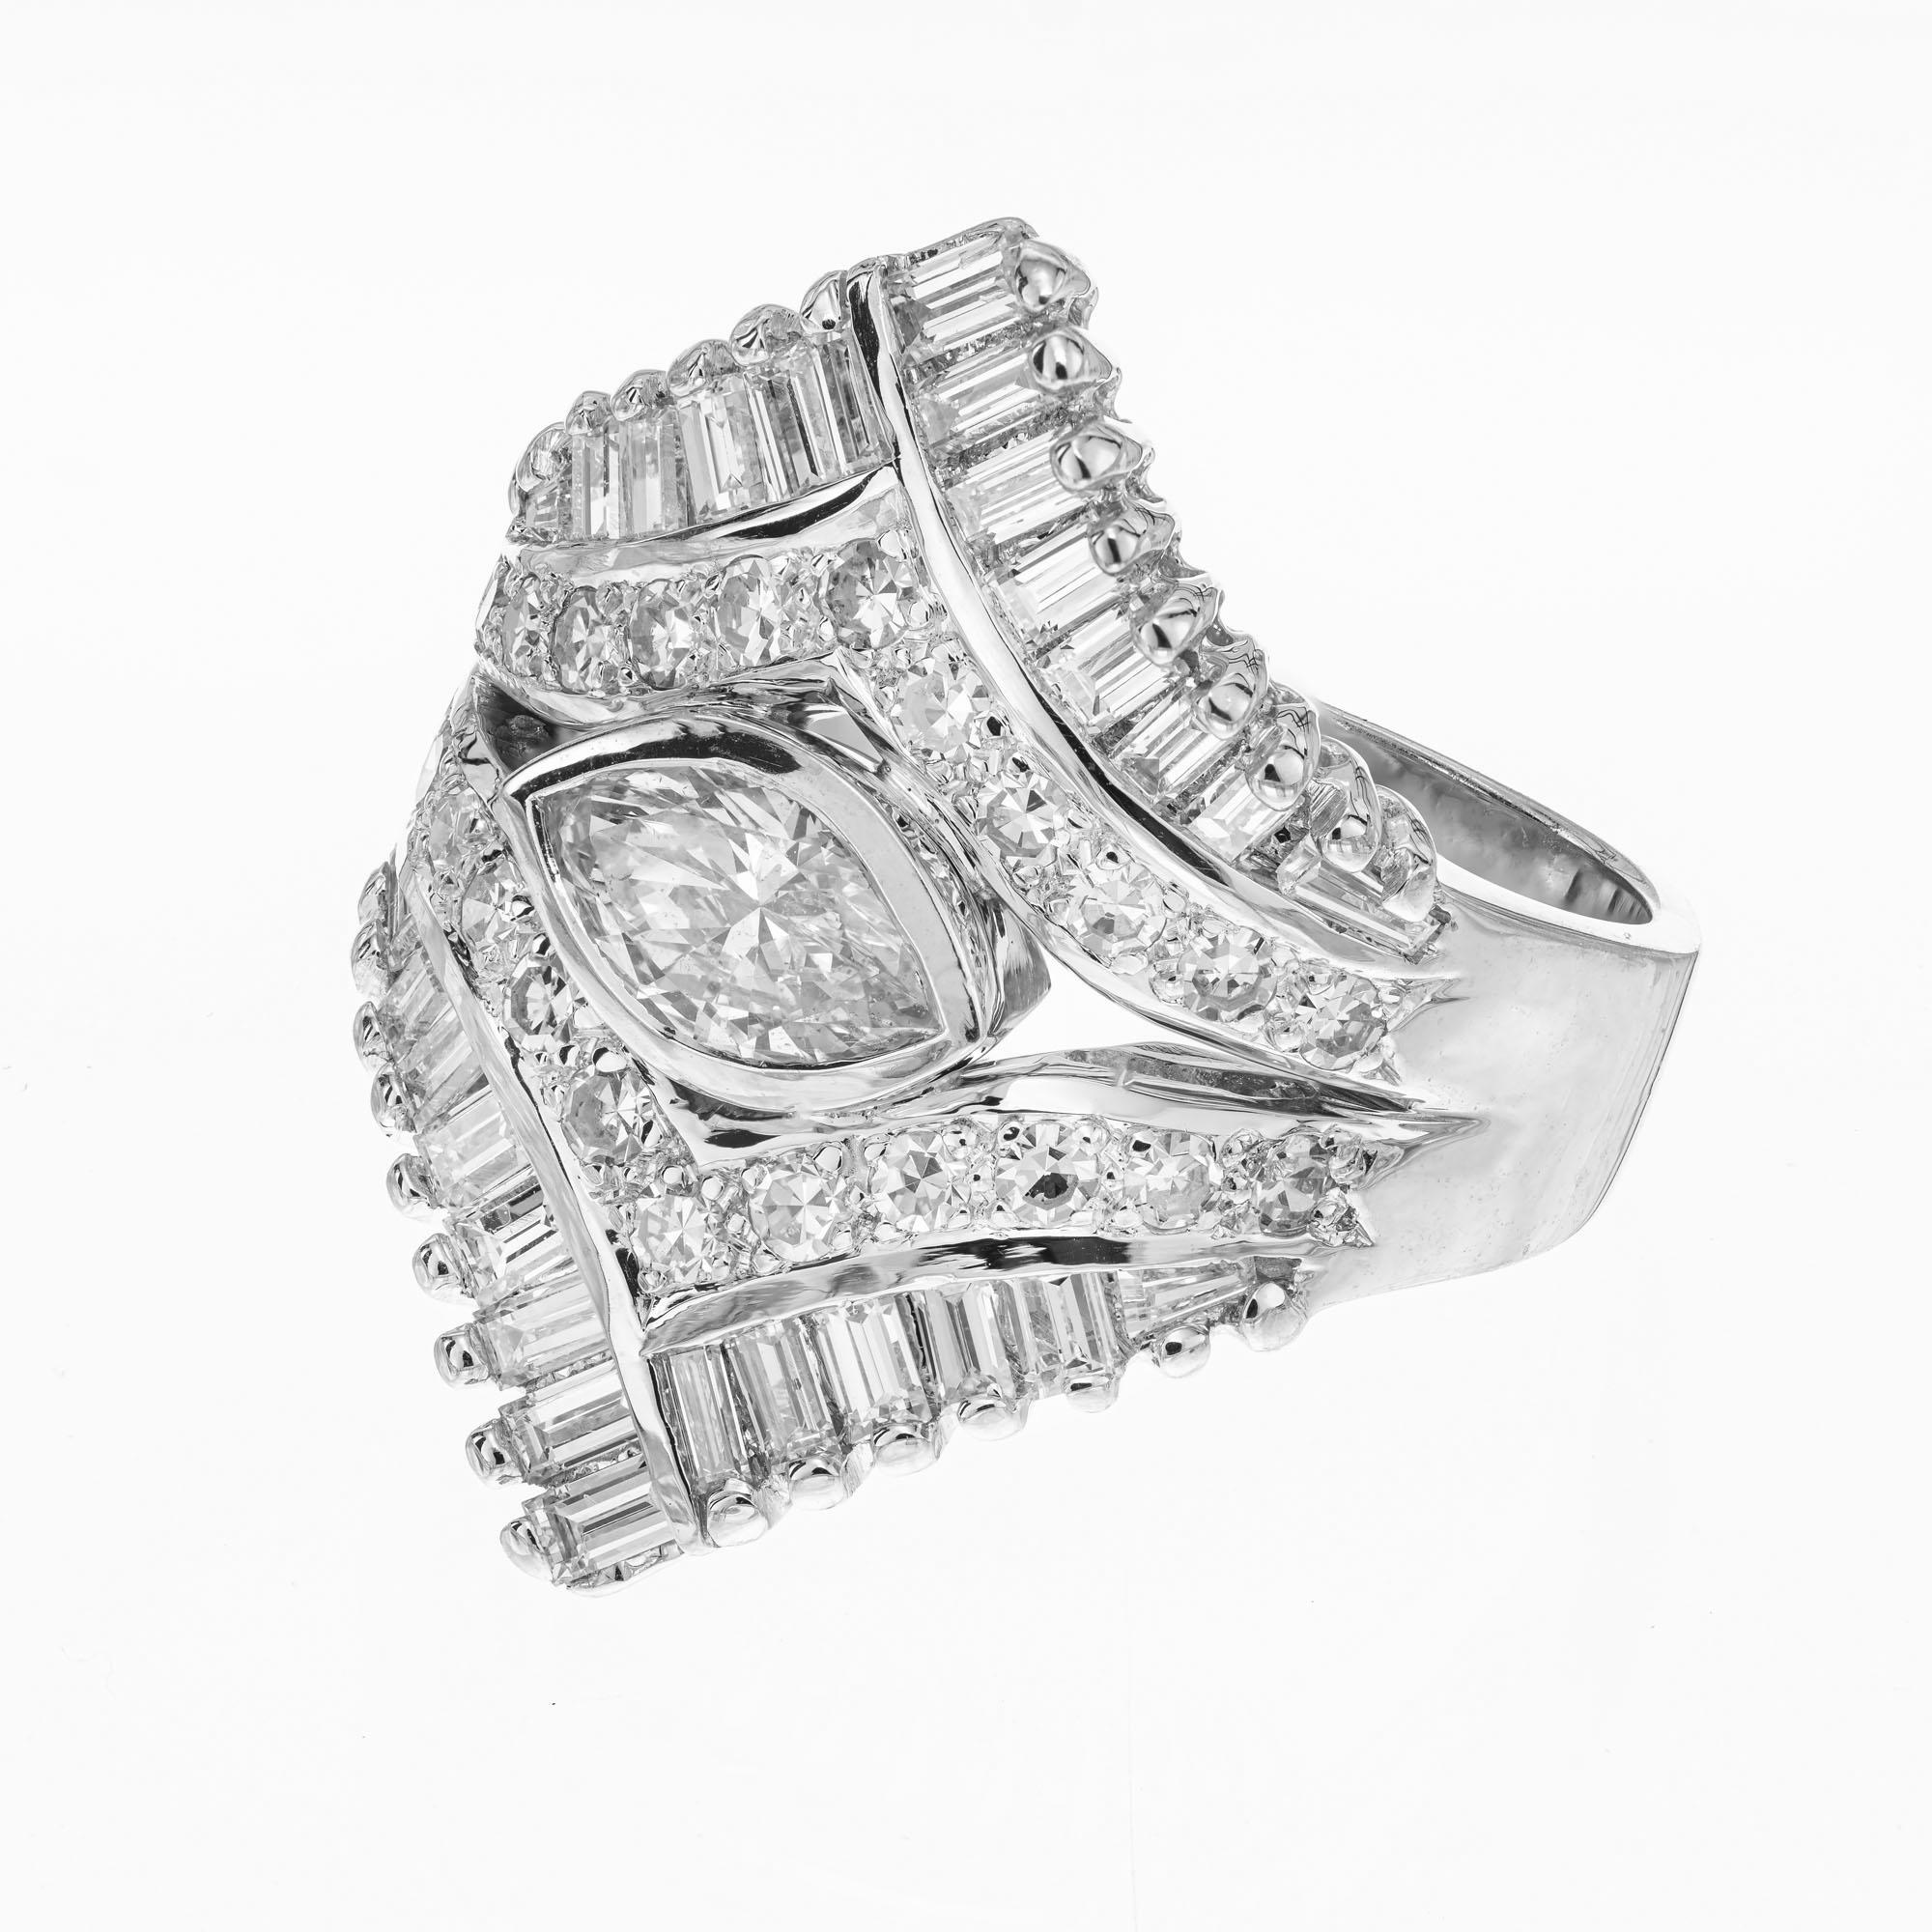 Vintage 1960's cluster cocktail or dinner diamond ring. EGL certified center marquise diamond accented by baguette and single cut diamonds in a 14k white gold setting. 

1 marquise cut diamond, F-G SI2 approx. .49cts EGL Certificate # 400145985D
28